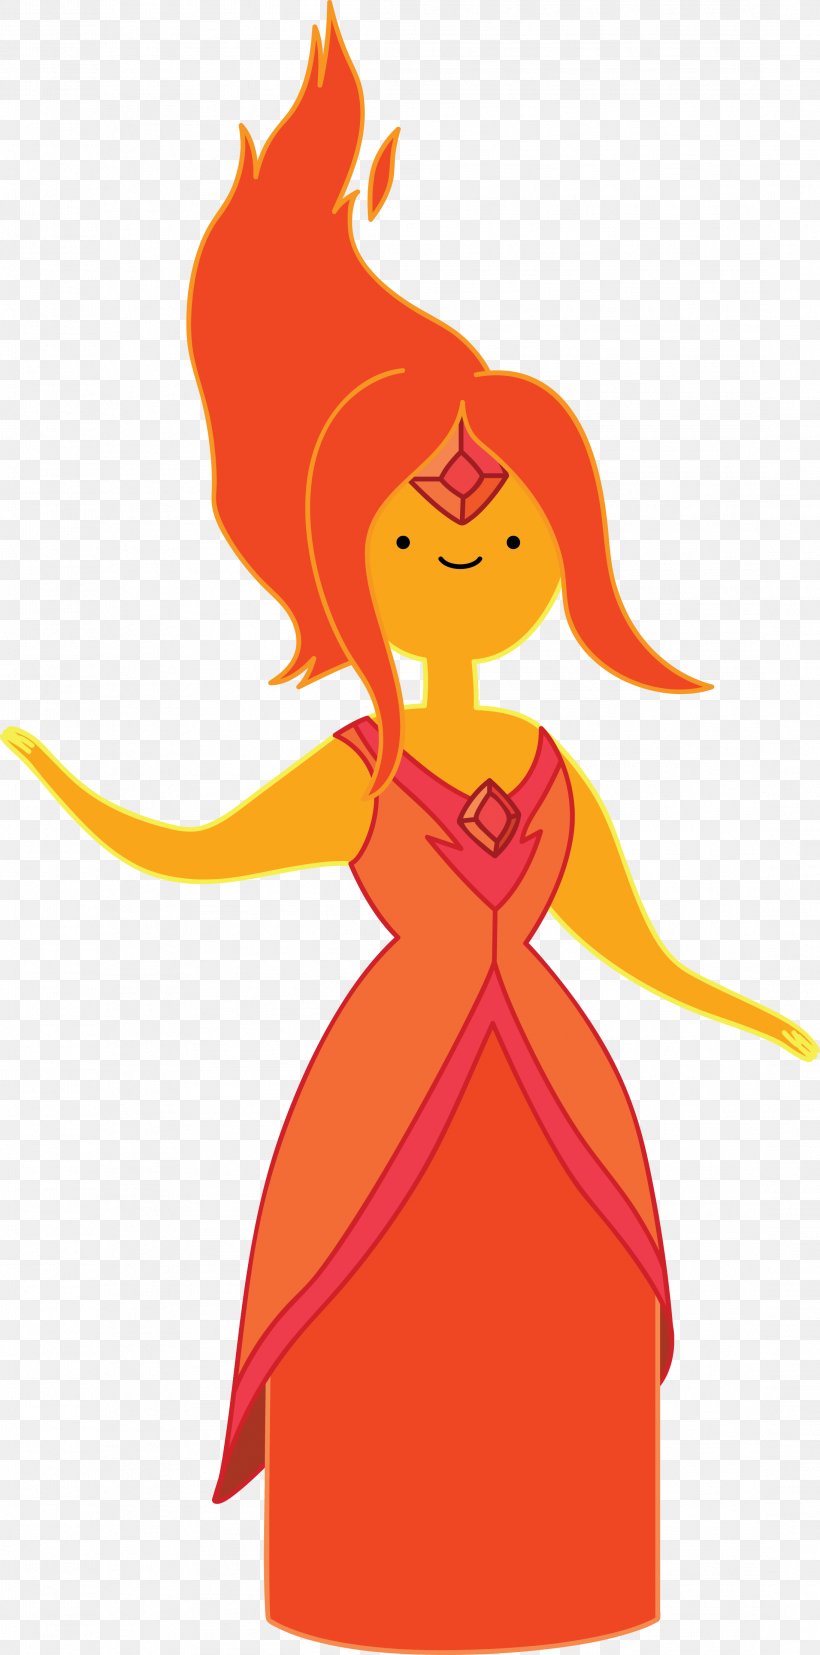 Finn The Human Flame Princess Adventure Time: Explore The Dungeon Because I Don't Know! Adventure Time: Finn & Jake Investigations Princess Bubblegum, PNG, 2189x4419px, Finn The Human, Adventure Time, Adventure Time Season 4, Art, Cartoon Download Free